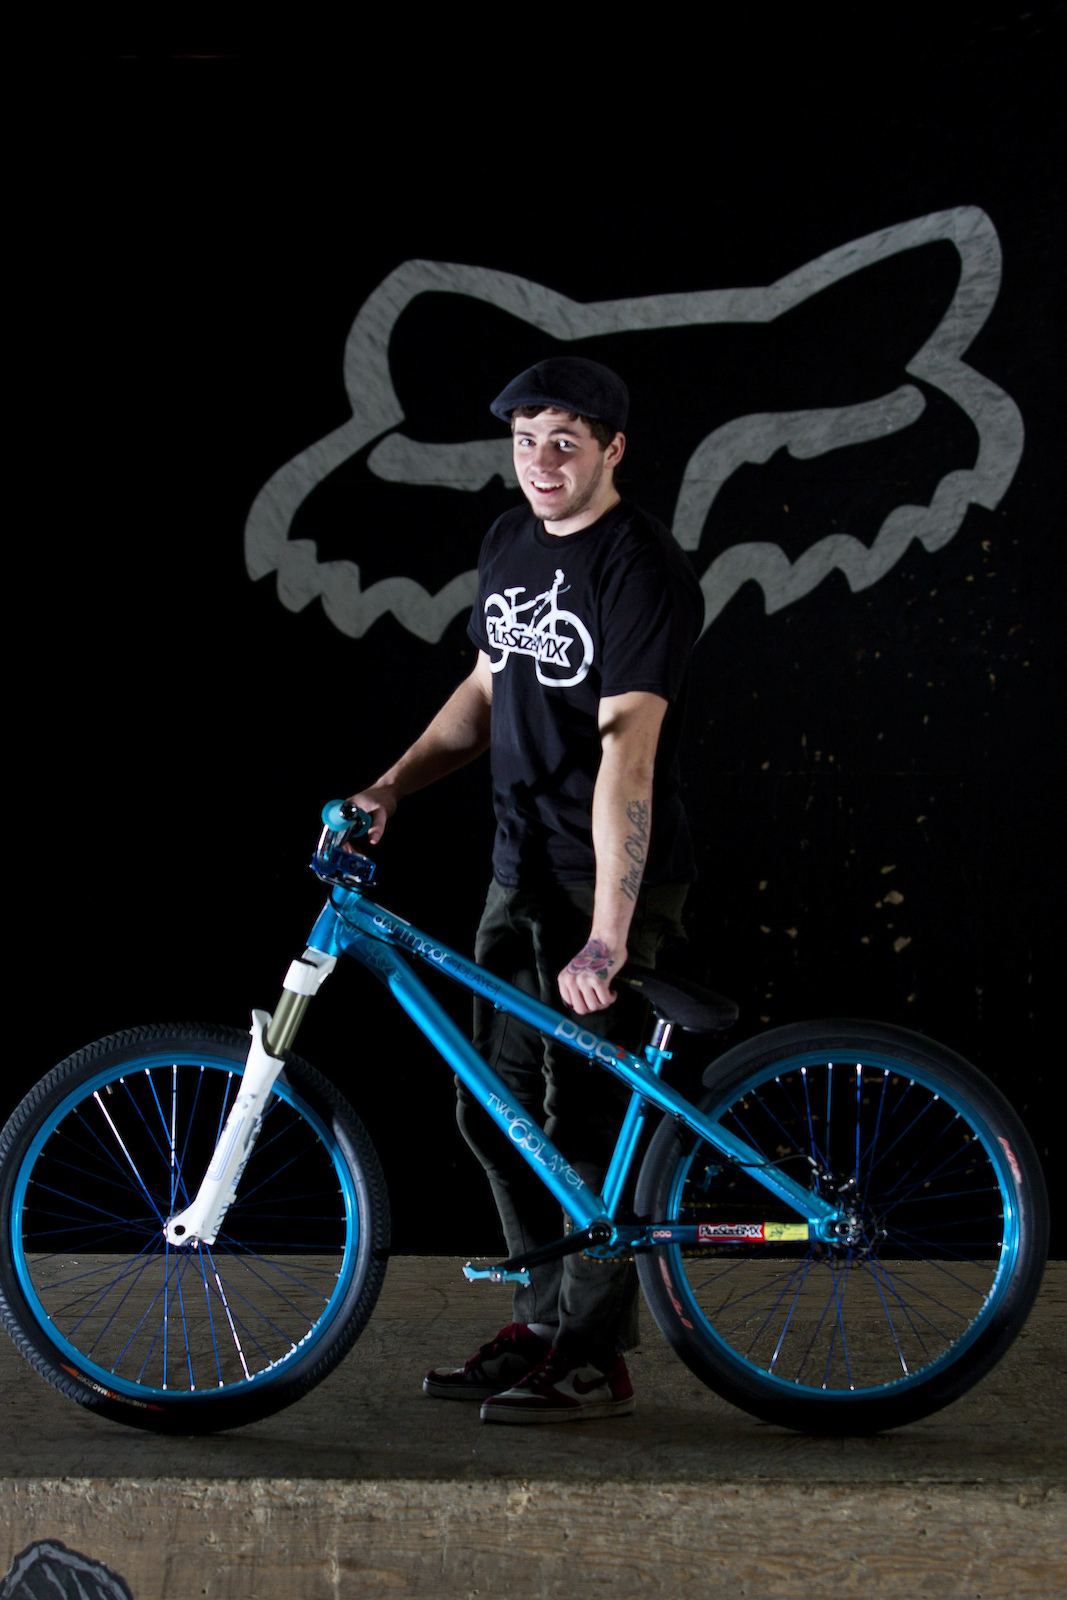 Nick is our Canadian shredder with the attitude to go high &amp; stylish! Recently he pops up with short flicks of his new bangers (360 triple bar or 360 bar to tailwhip) and from all this madness he spare some time to shot this "bikecheck" photos! Way to go mate!